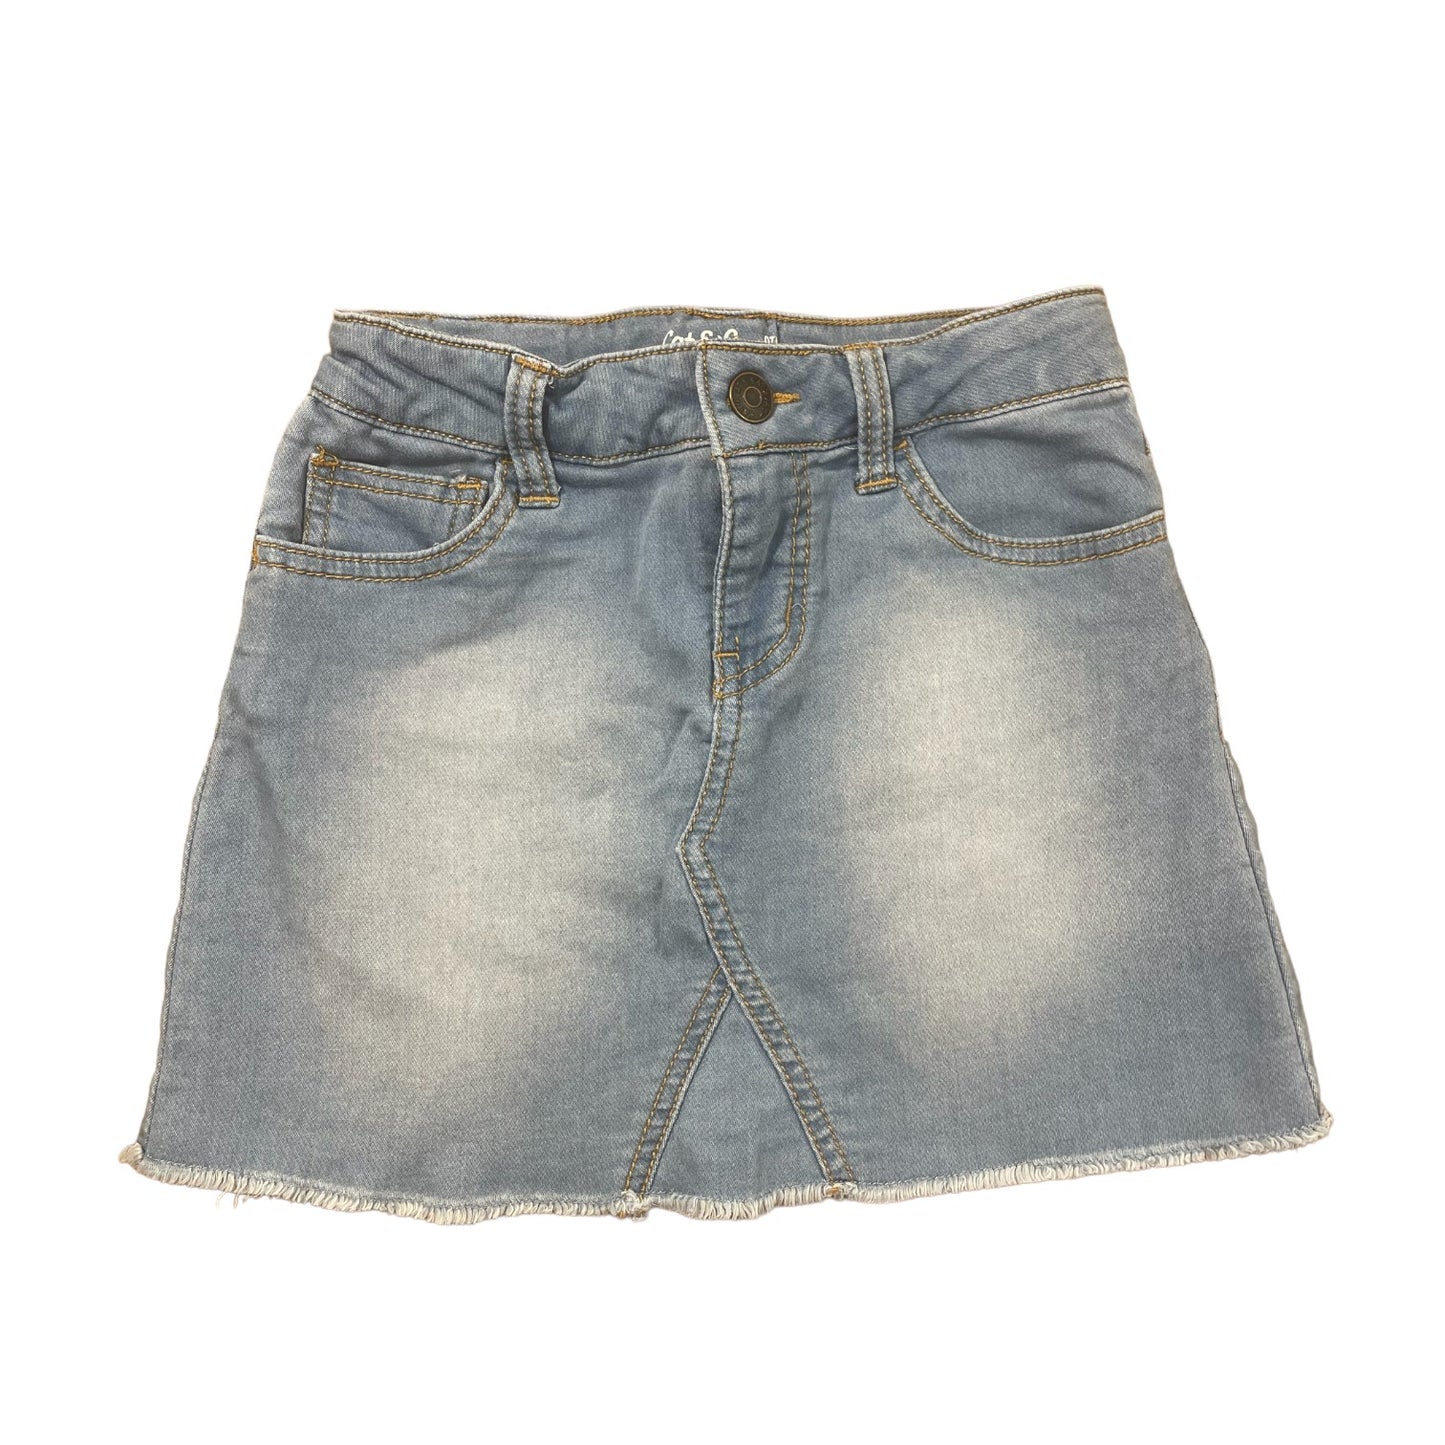 Cat and Jack Jean Skirt Size 6-6X